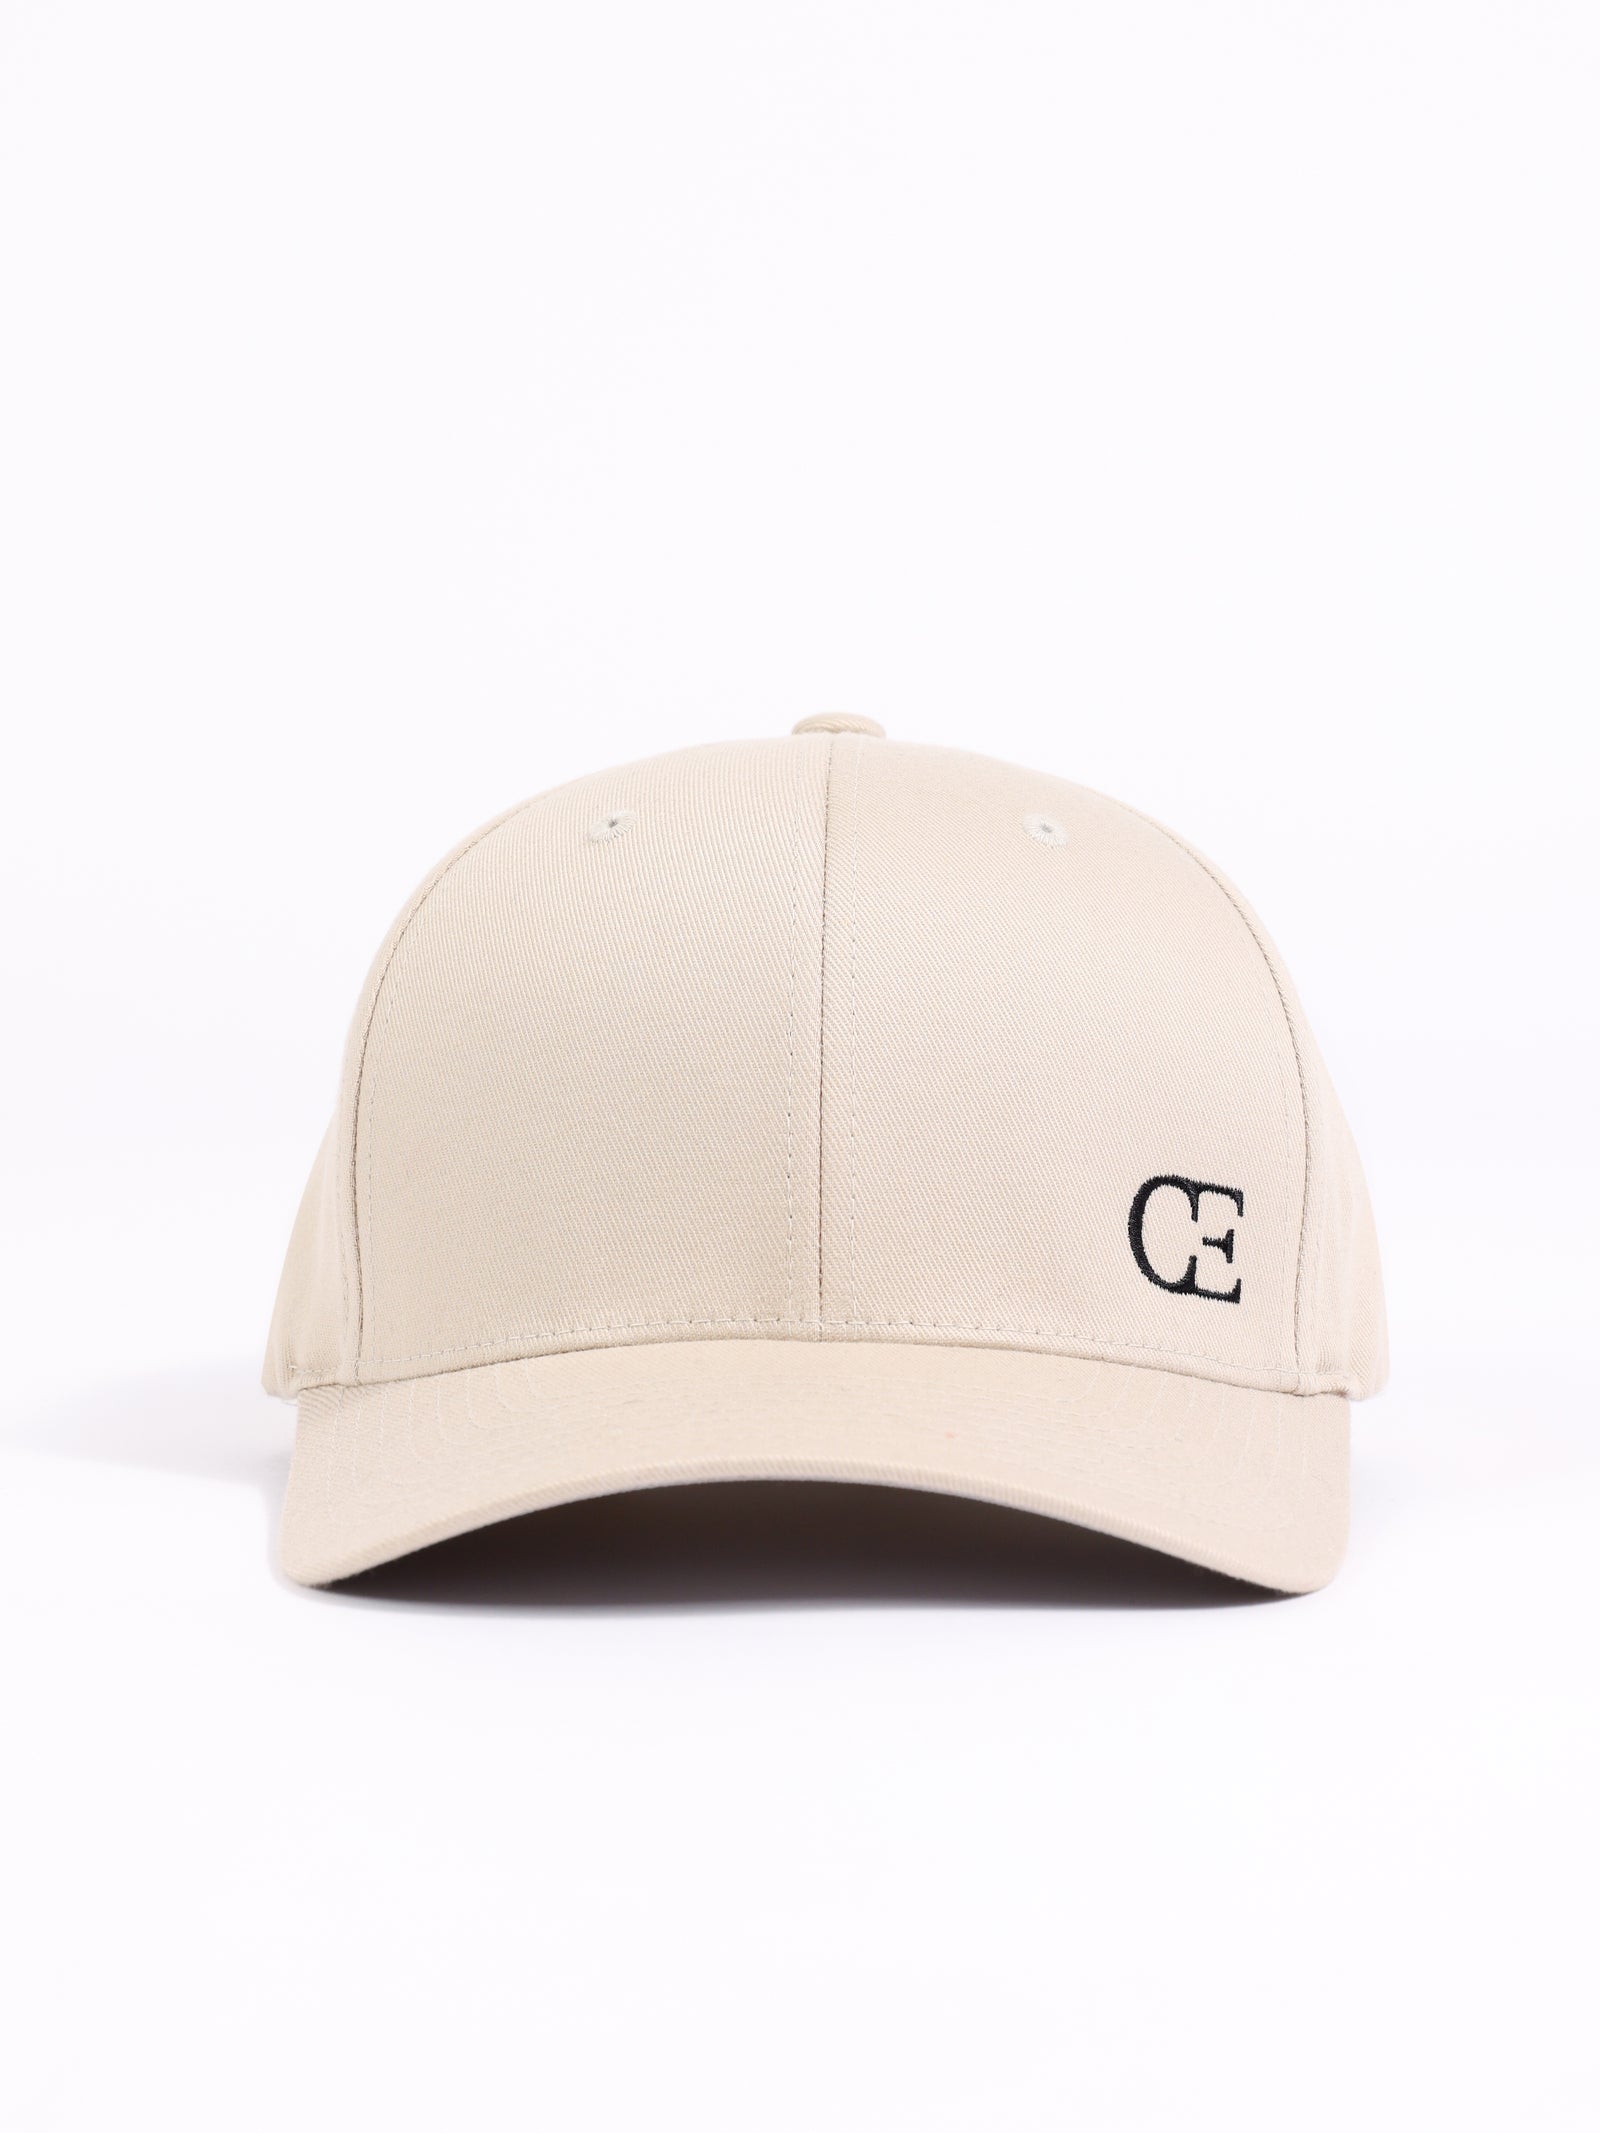 Stone urban classic hat with white background 